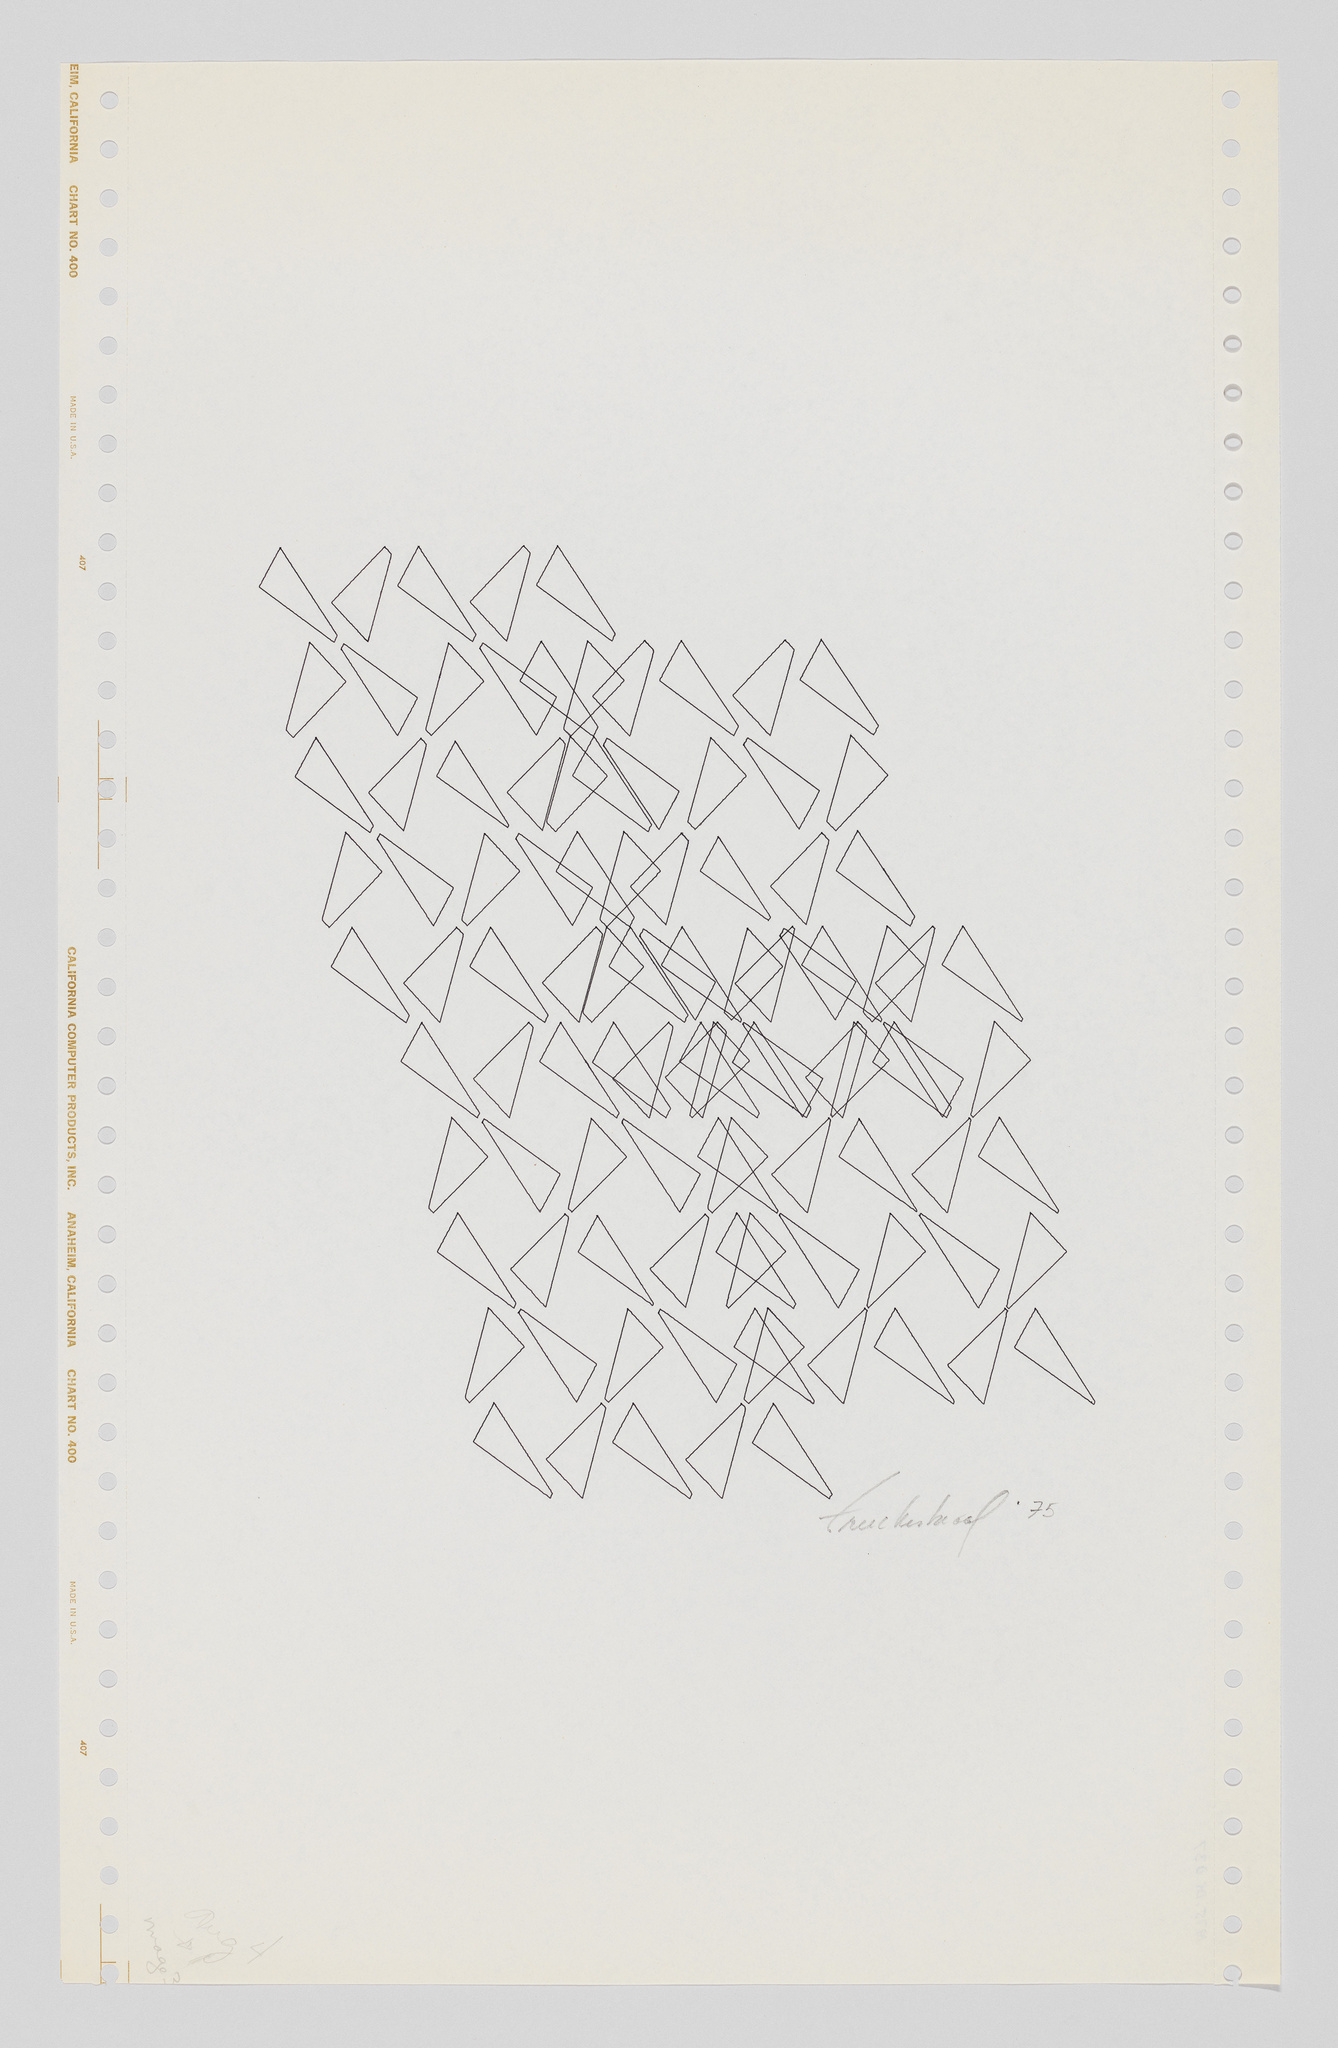 Joan Truckenbrod | Coded Algorithmic Drawing (#12) | Whitney Museum of ...